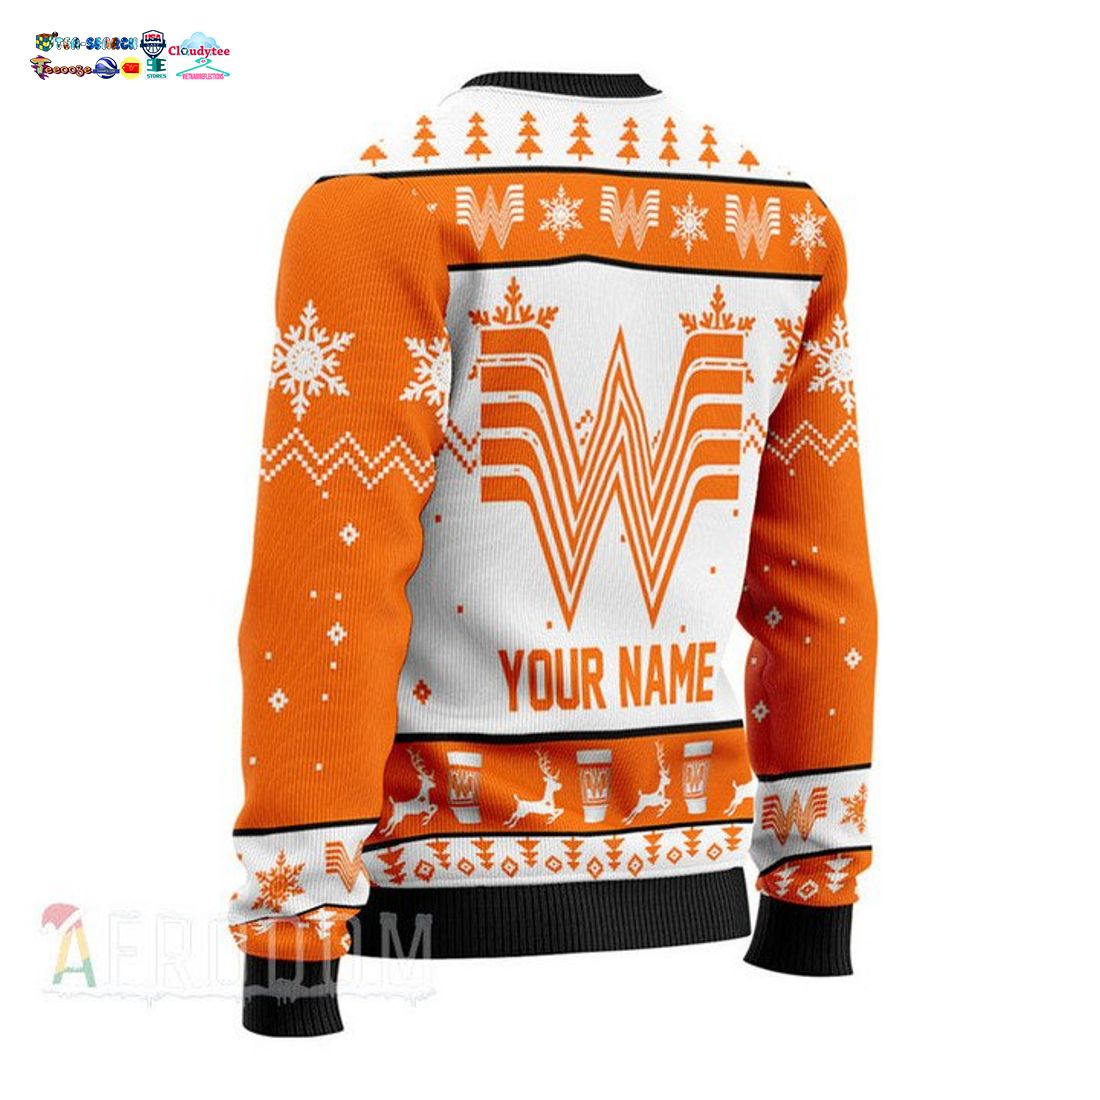 Personalized Name Whataburger Ugly Christmas Sweater